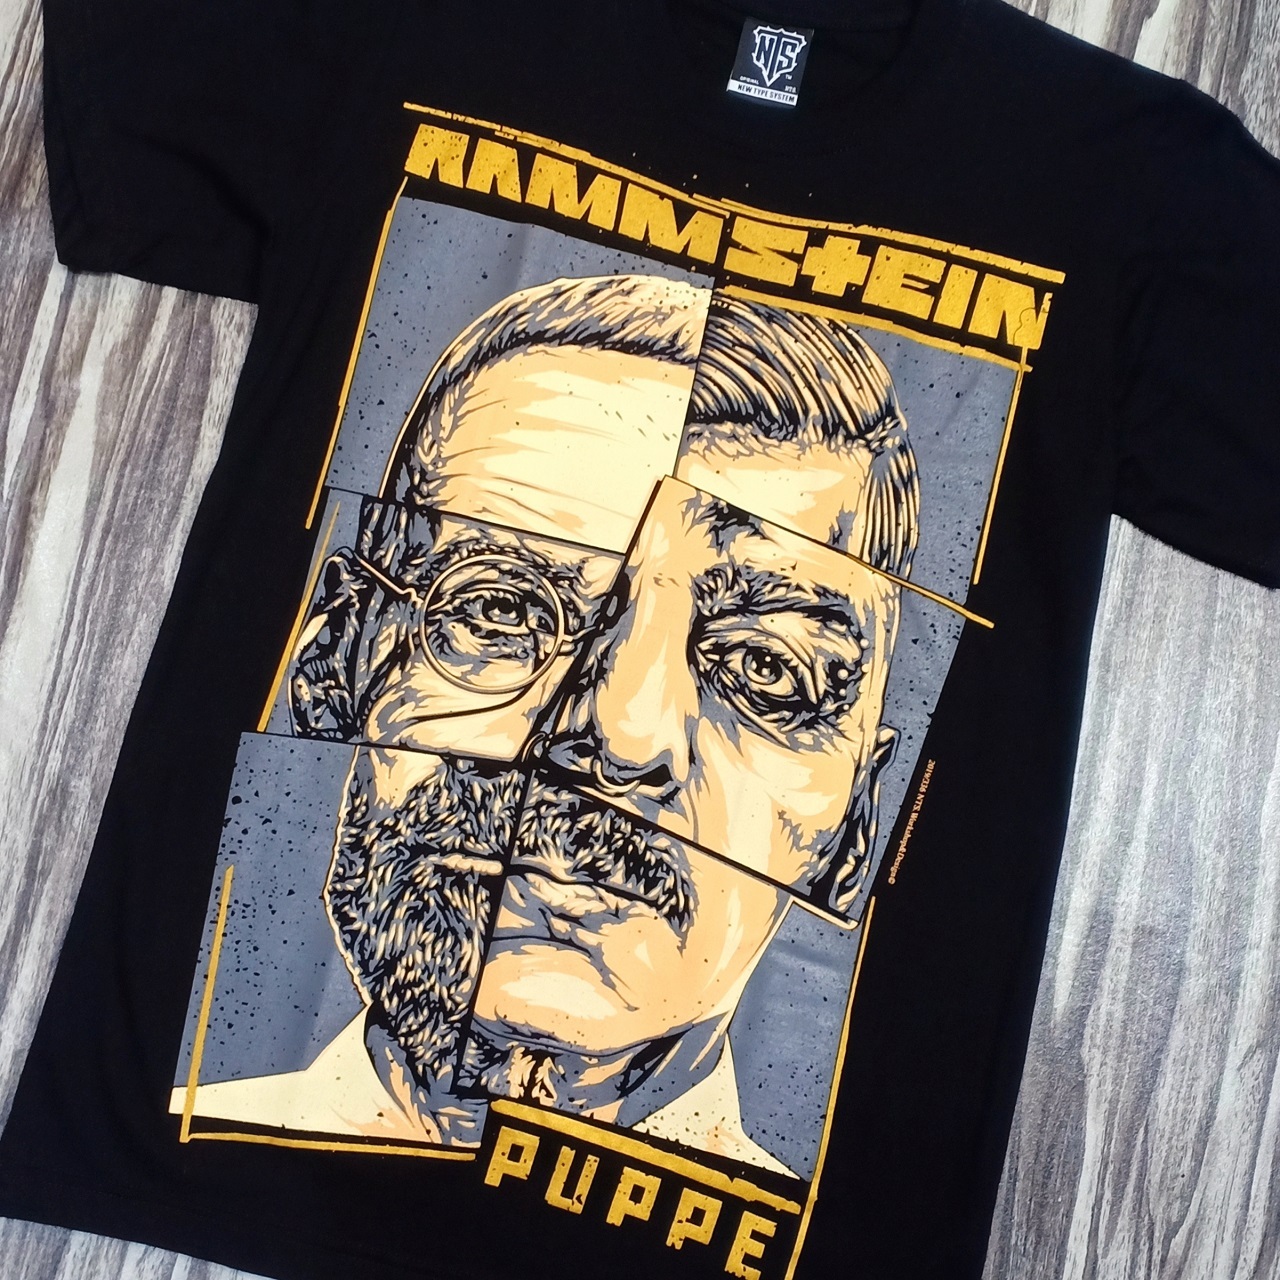 19R336 RAMMSTEIN GERMAN HARD ROCK BAND PUPPE COVER ALBUM COLLECTION NTS  ORIGINAL NEW TYPE SYSTEM COTTON T-SHIRT – PREMIUM GRADE BLACK TIMBER NEW  TYPE SYSTEM MOAI SPEED HIGH QUALITY SILK SCREEN COLLECTABLE